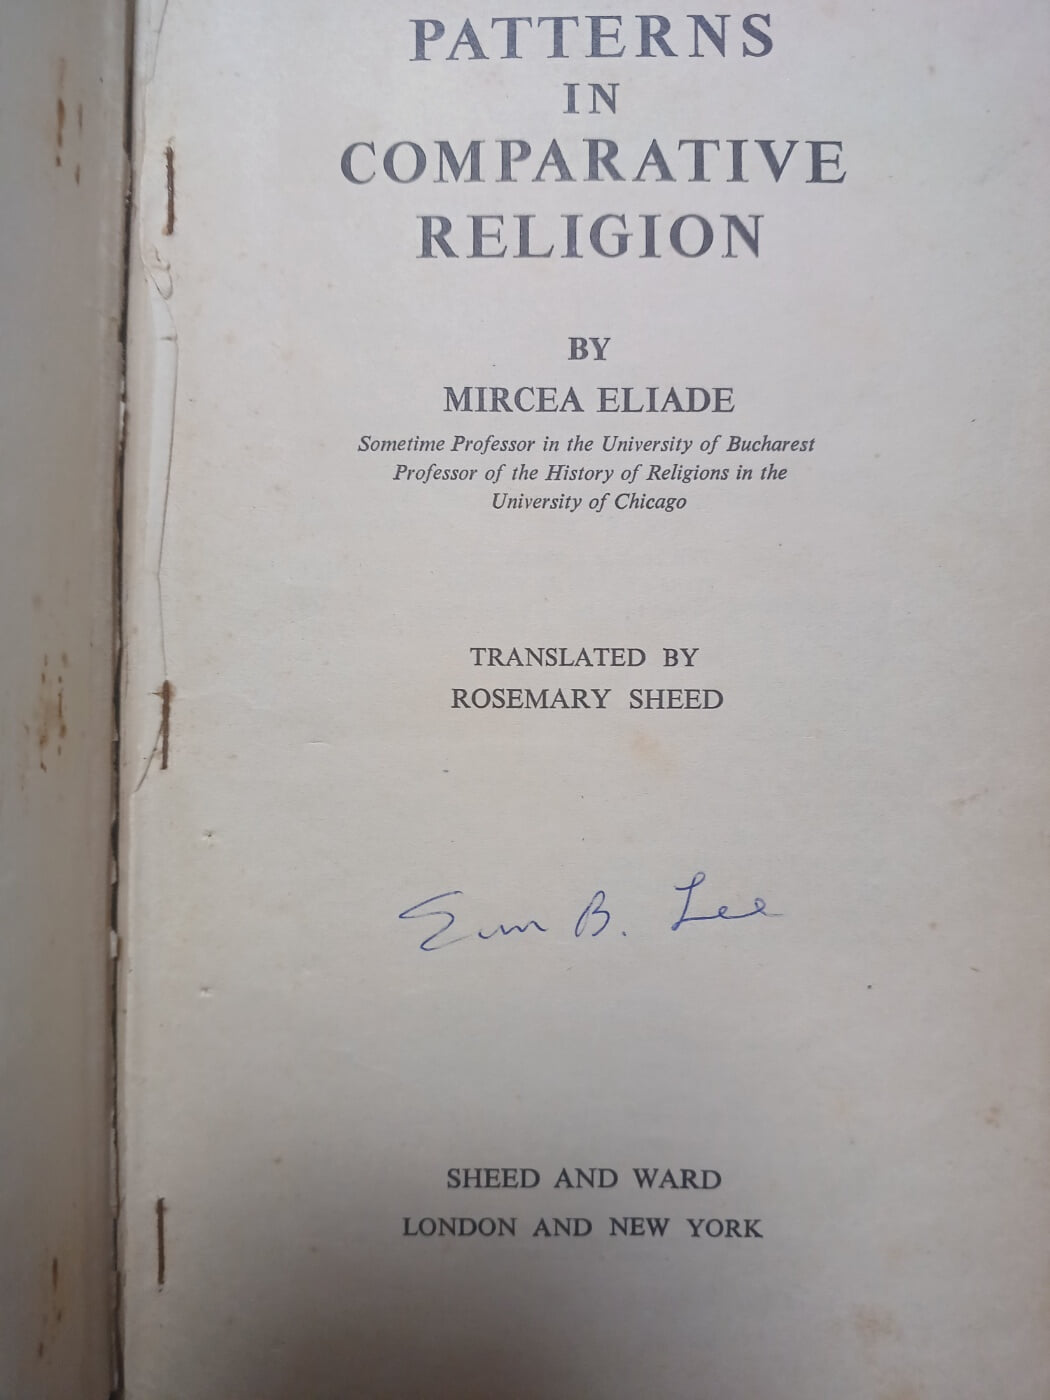 patterns in comparative religion(hardcover) 1958년 초판본